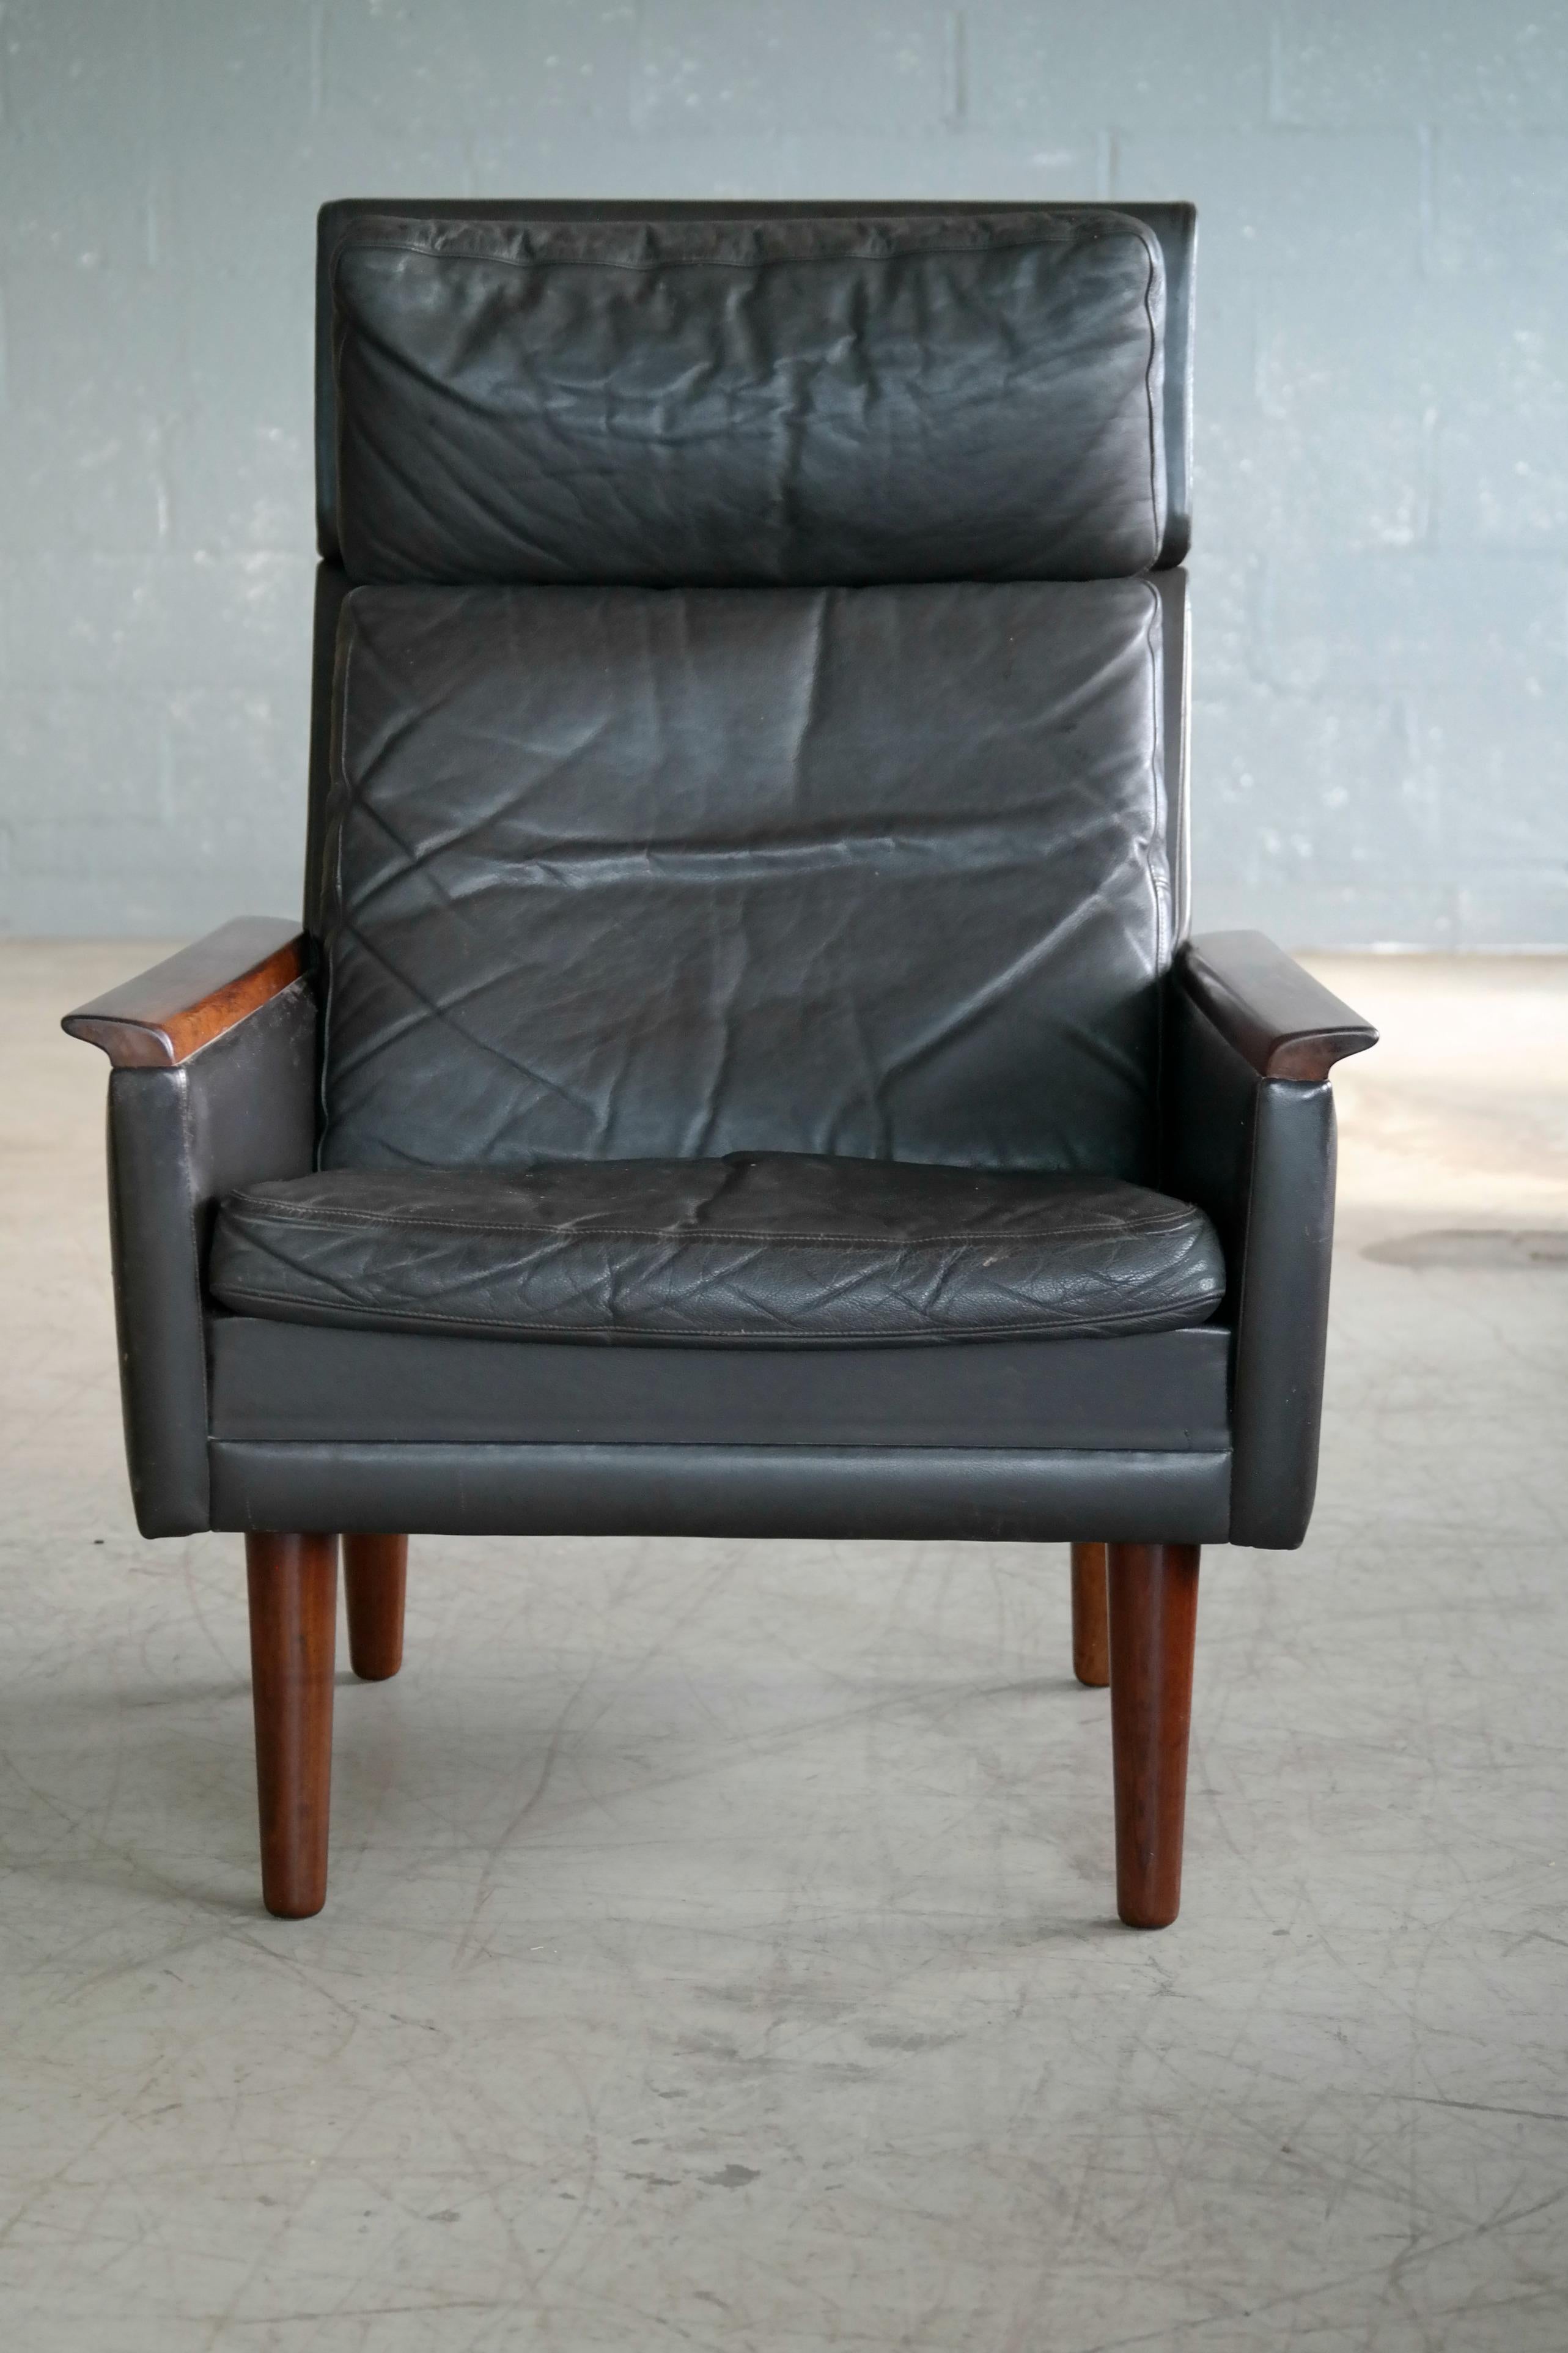 Beautiful very elegant high back lounge chair in dark almost black cordovan colored leather with semi-down filled cushions. Armrests in solid rosewood with beautiful grain and color. The chair design bear some resemblance to Knut Saeter's upscale